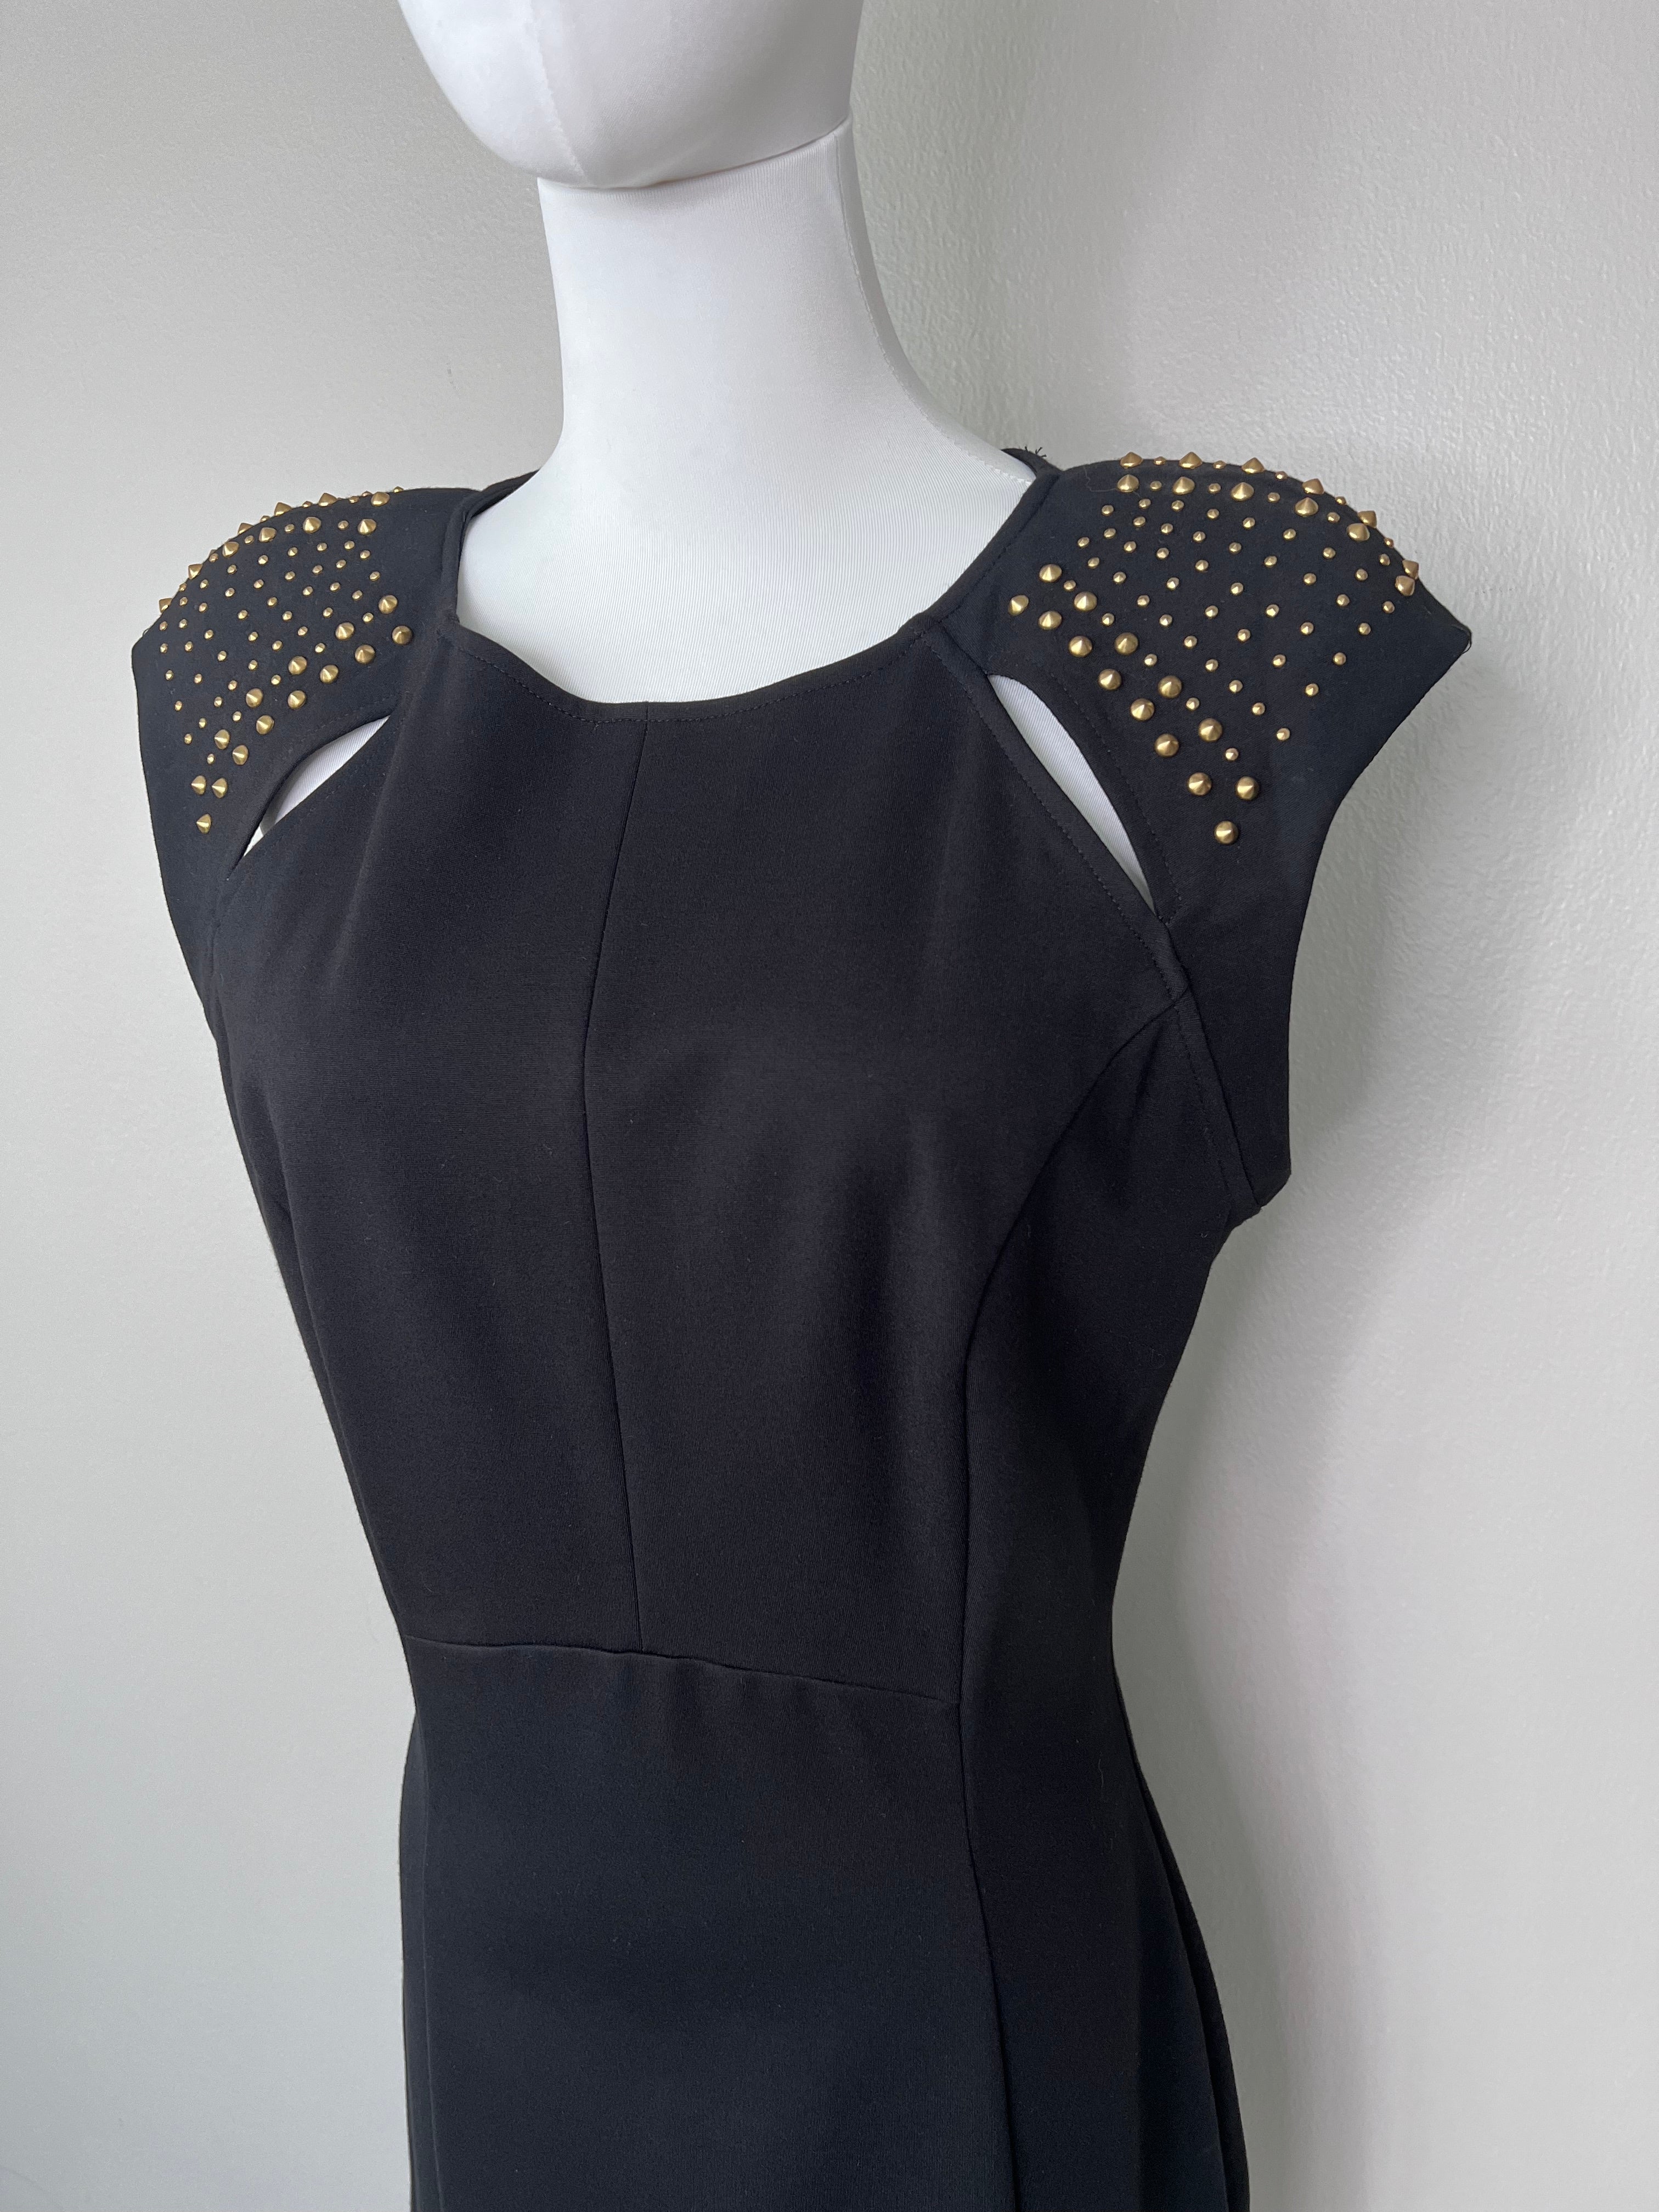 Black short dress with studded gold sleeves - ABS